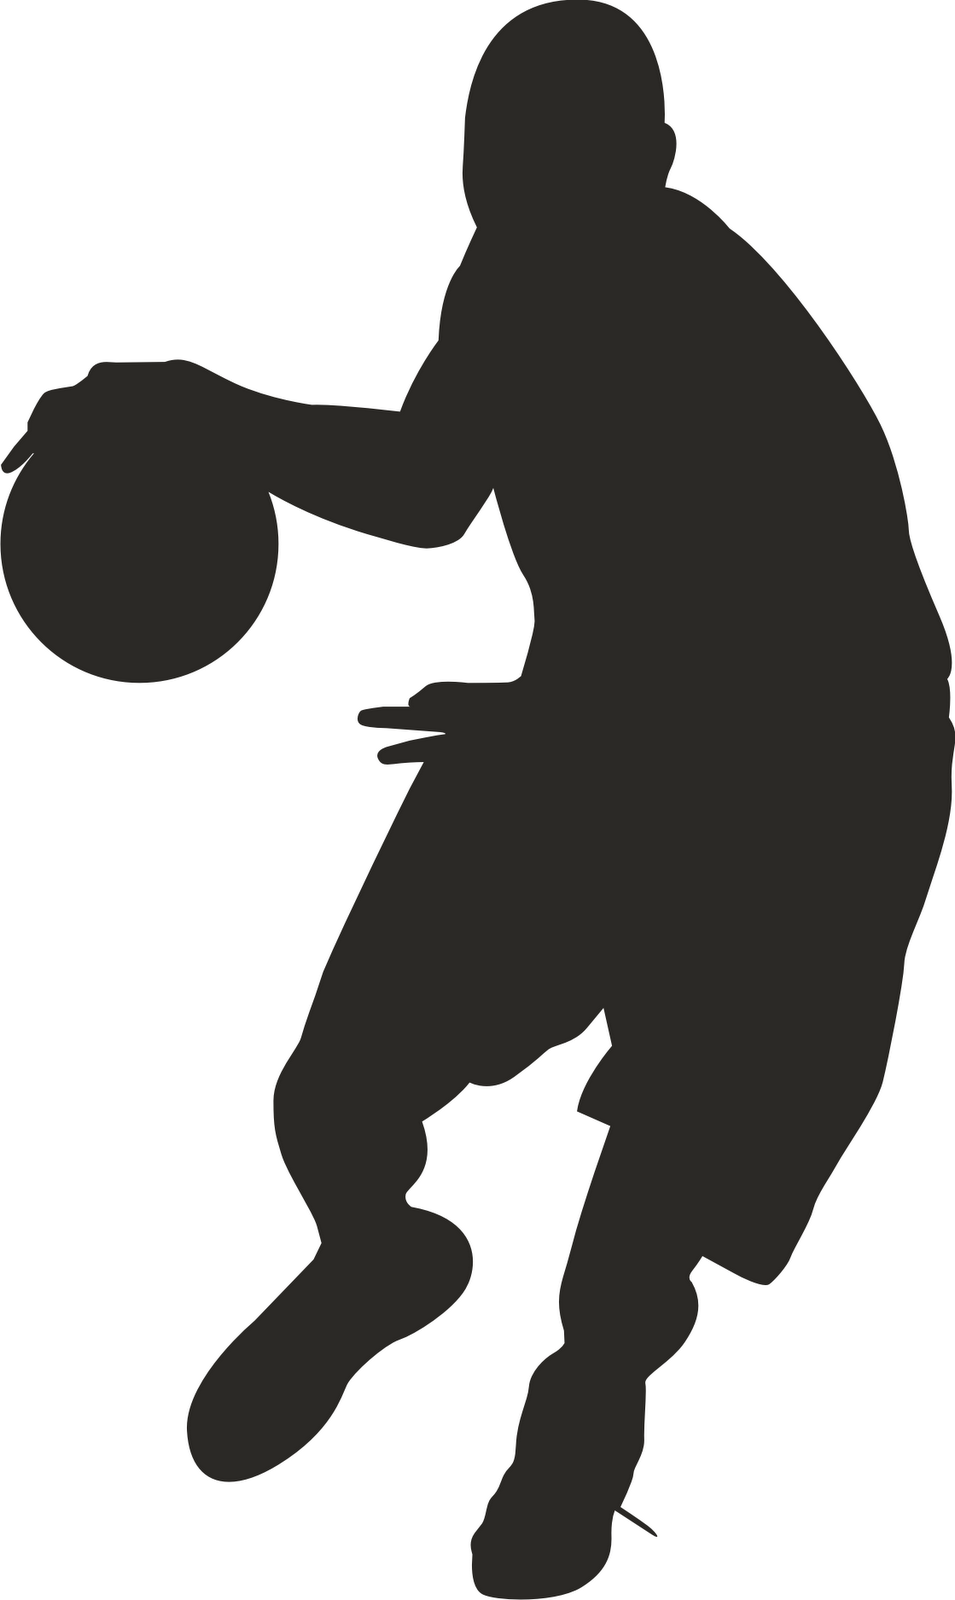 Images For > Basketball Ball Clipart